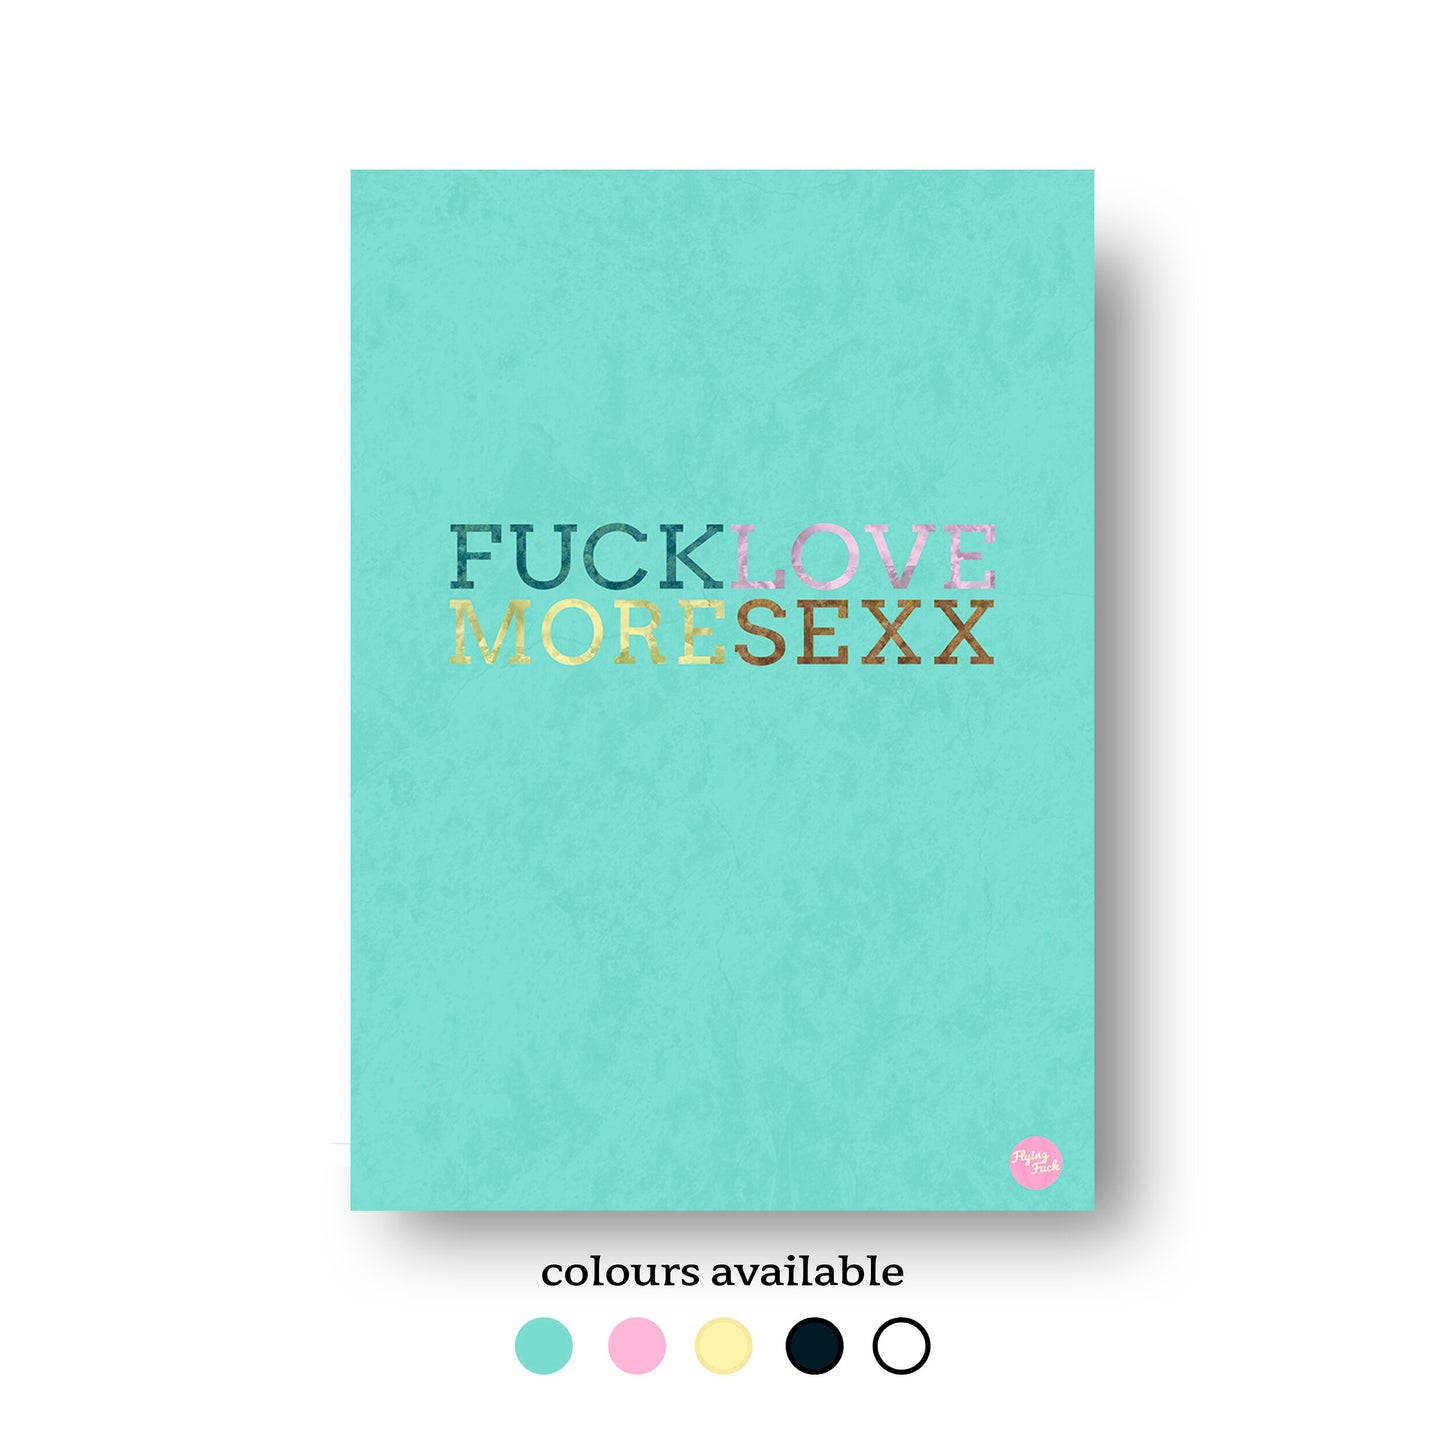 NOKUKO - art- Flying Fuck - Love More - colours available